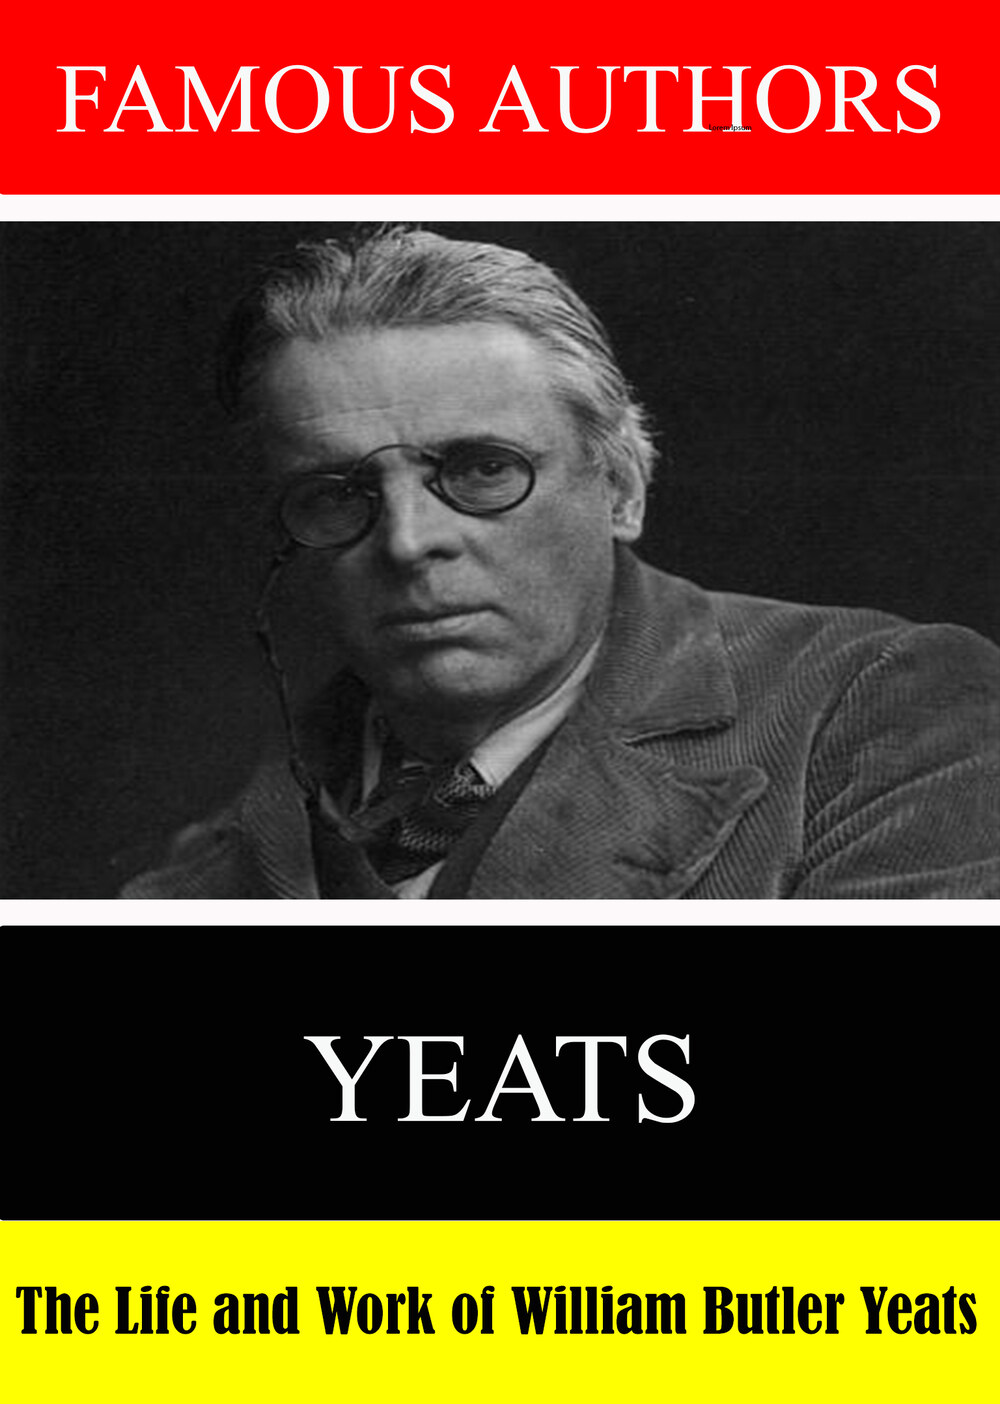 L7915 - Famous Authors: The Life and Work of William Butler Yeats